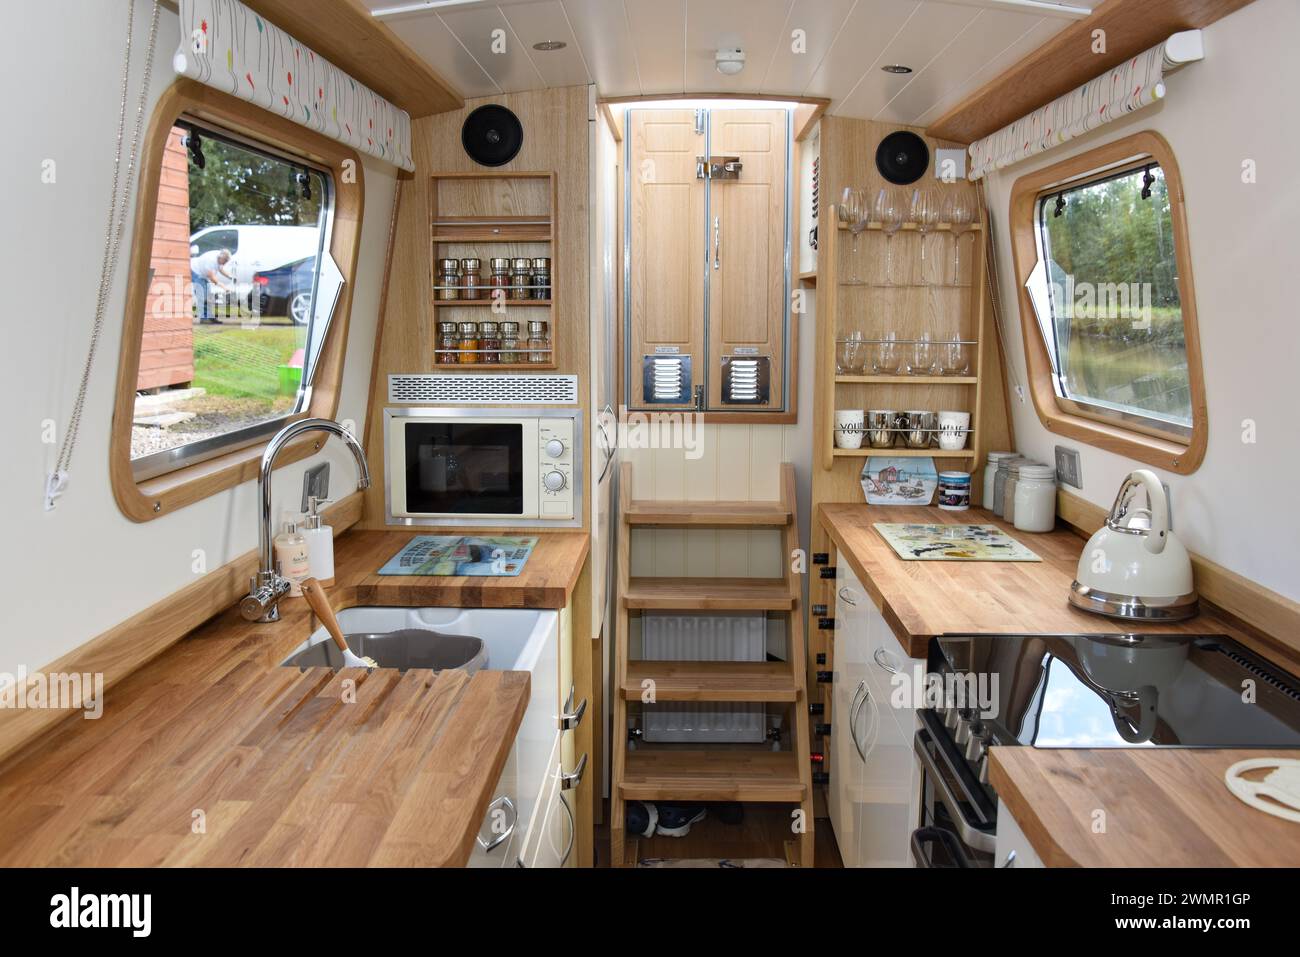 Walk through galley of a narrowboat with kitchen appliances in situ. Stock Photo